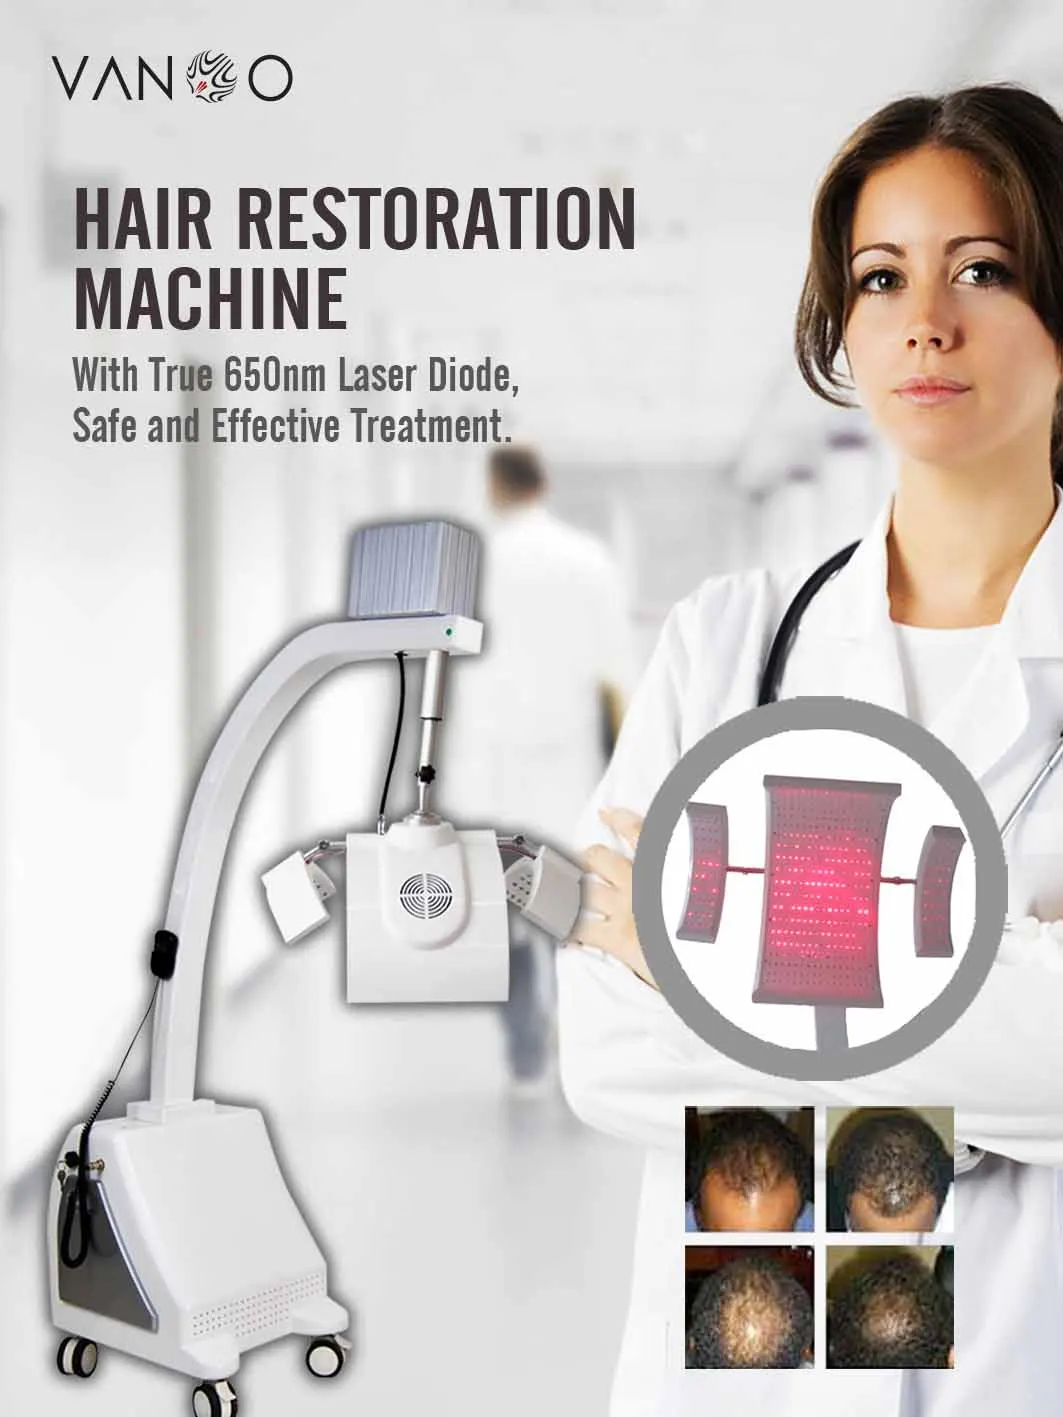 Low Level Laser Therapy device used for hair restoration and growth